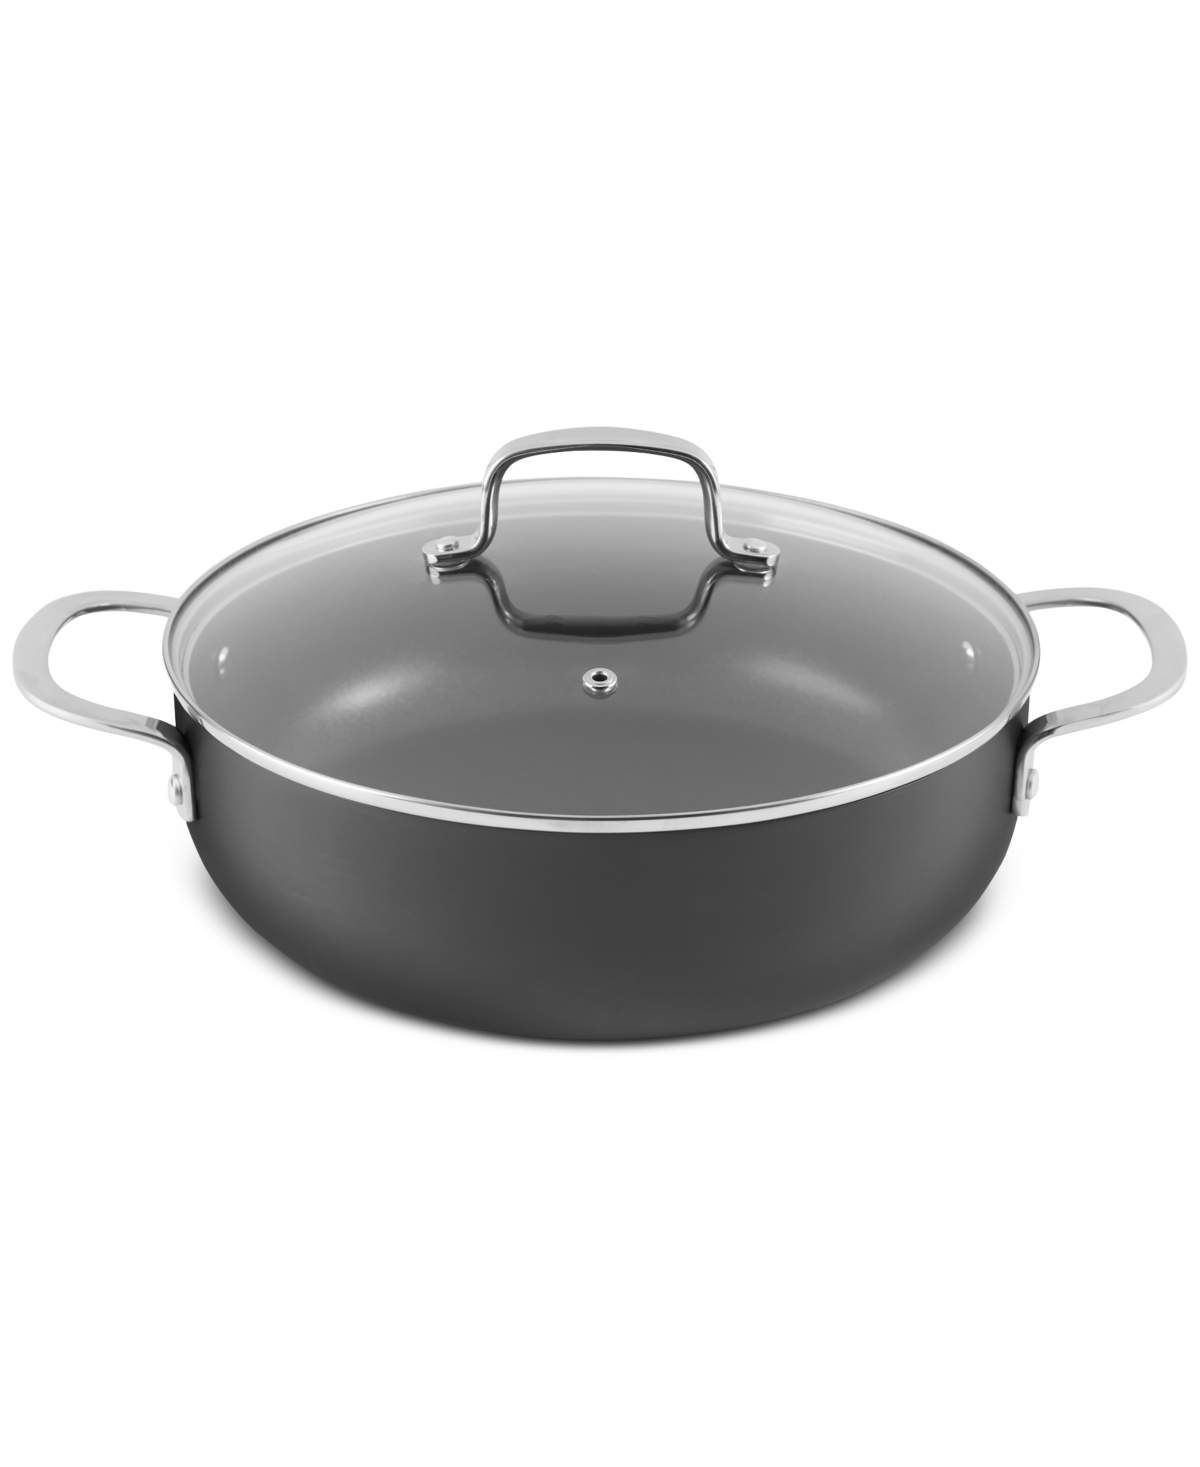 Shop The Cellar Hard-anodized Aluminum 5-qt. Covered Everyday Pan, Created For Macy's